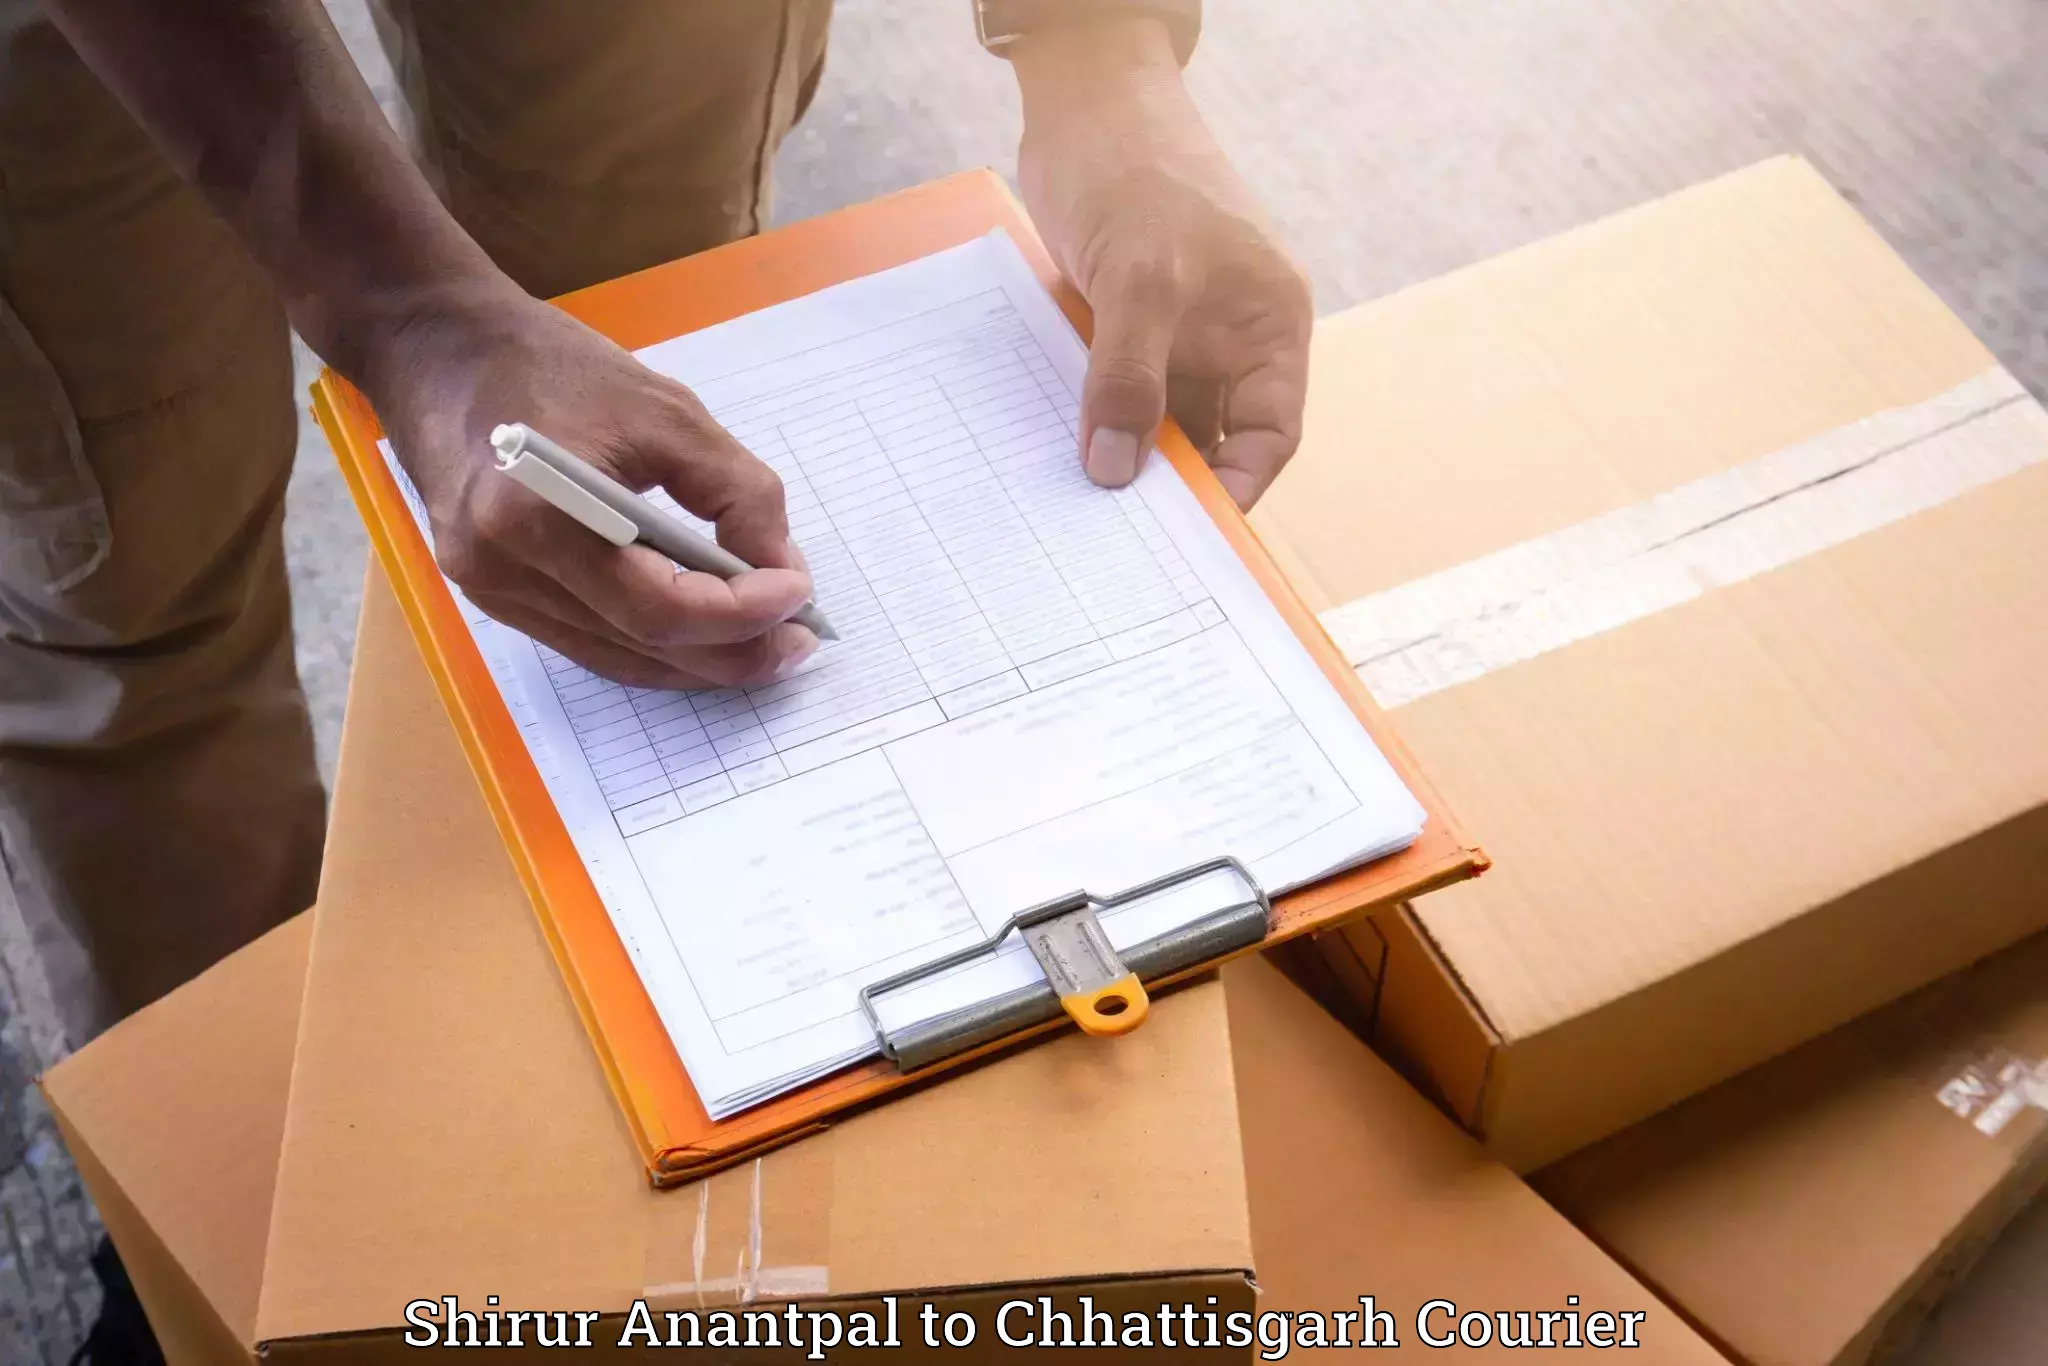 Efficient relocation services Shirur Anantpal to Raigarh